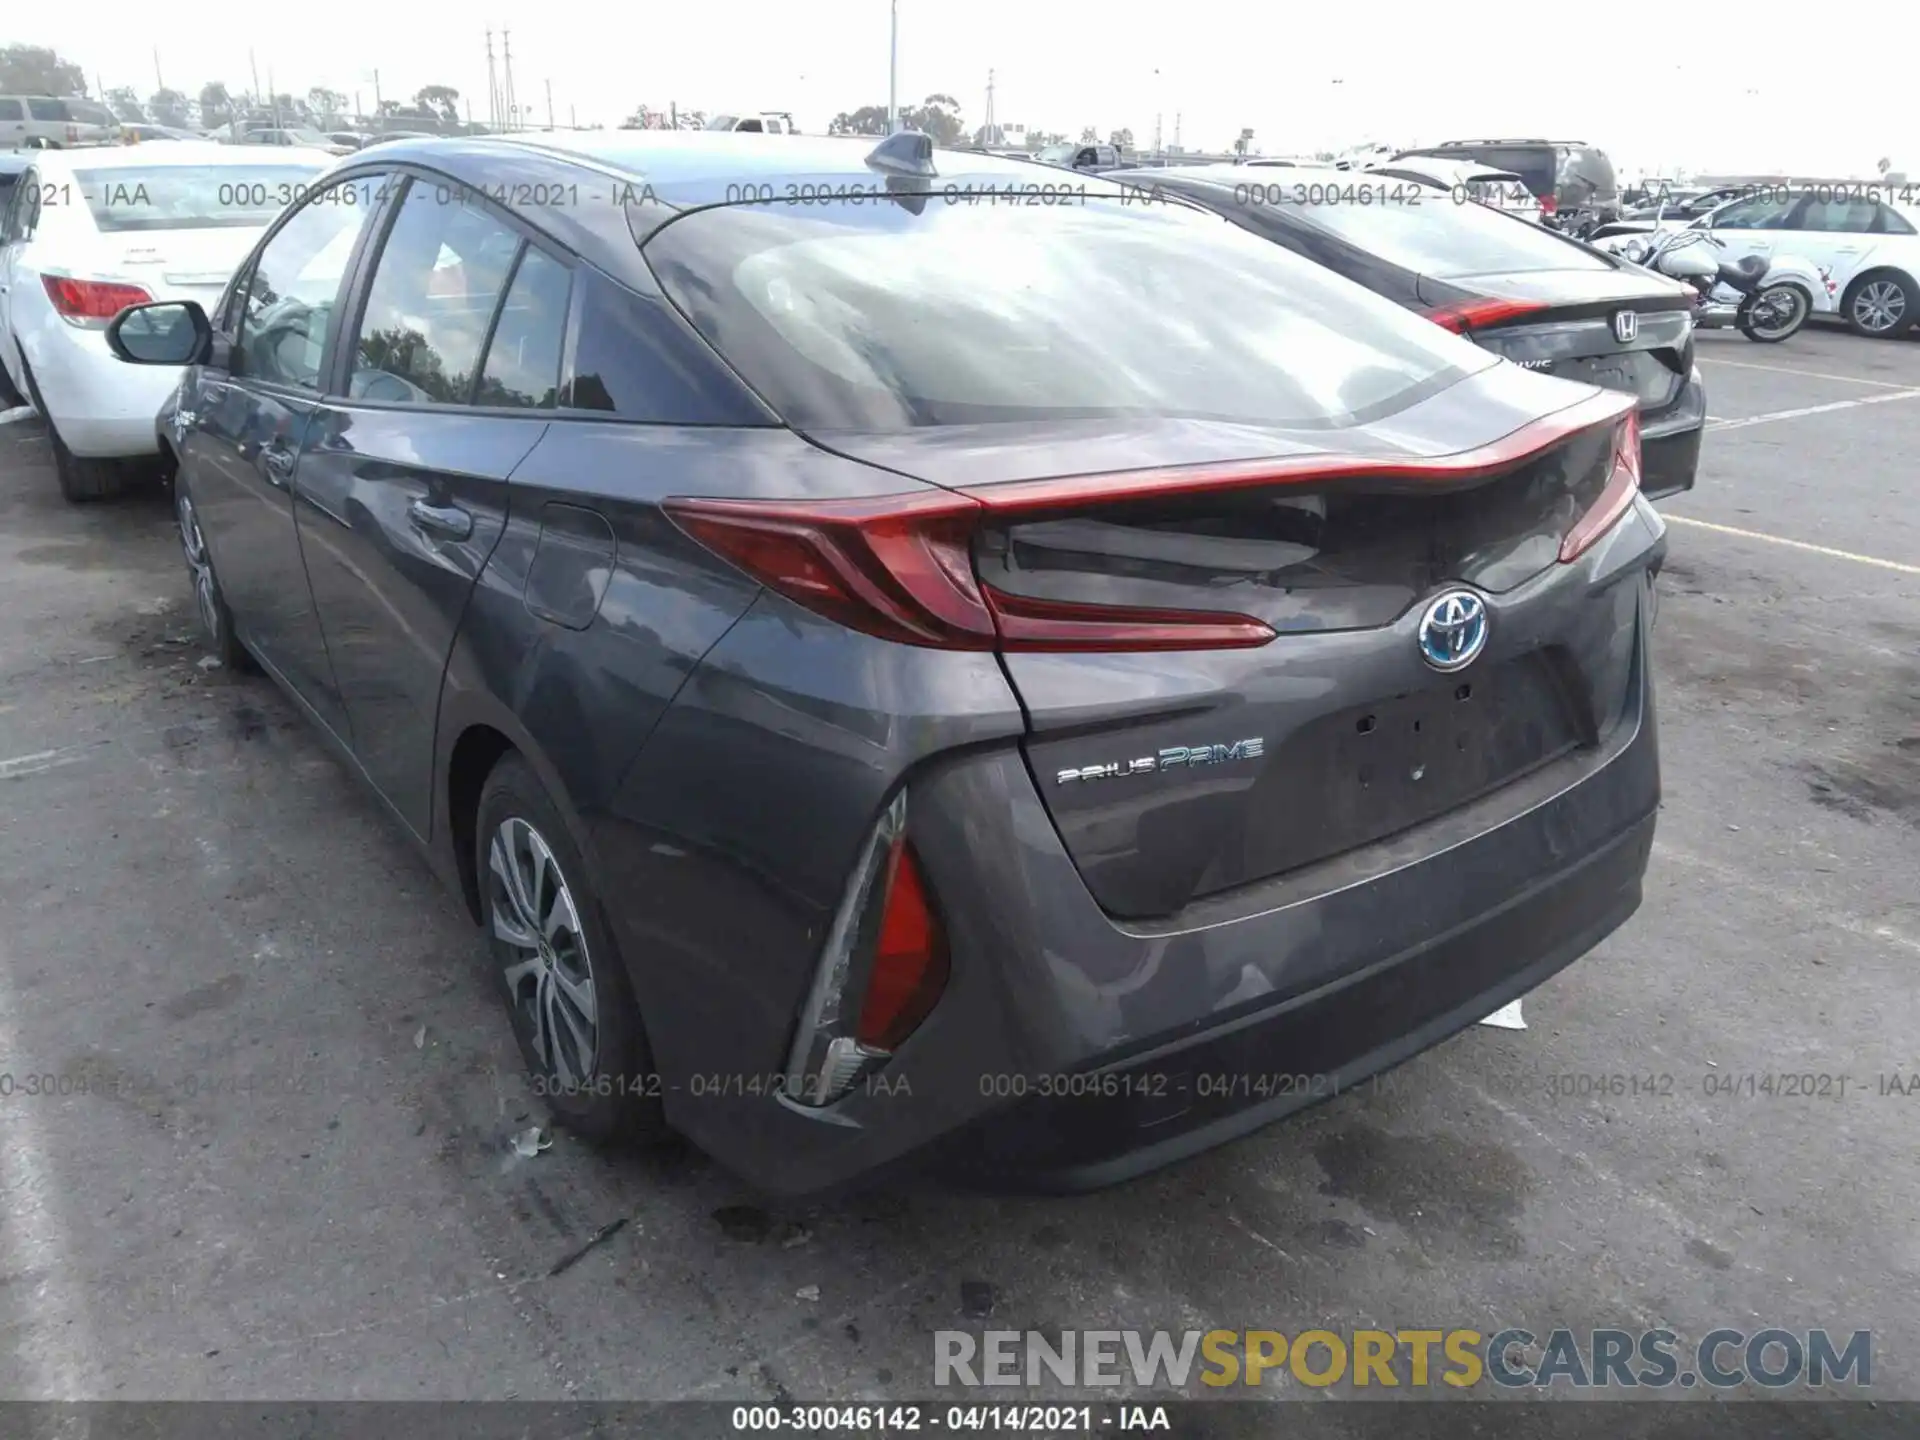 3 Photograph of a damaged car JTDKAMFPXM3169674 TOYOTA PRIUS PRIME 2021